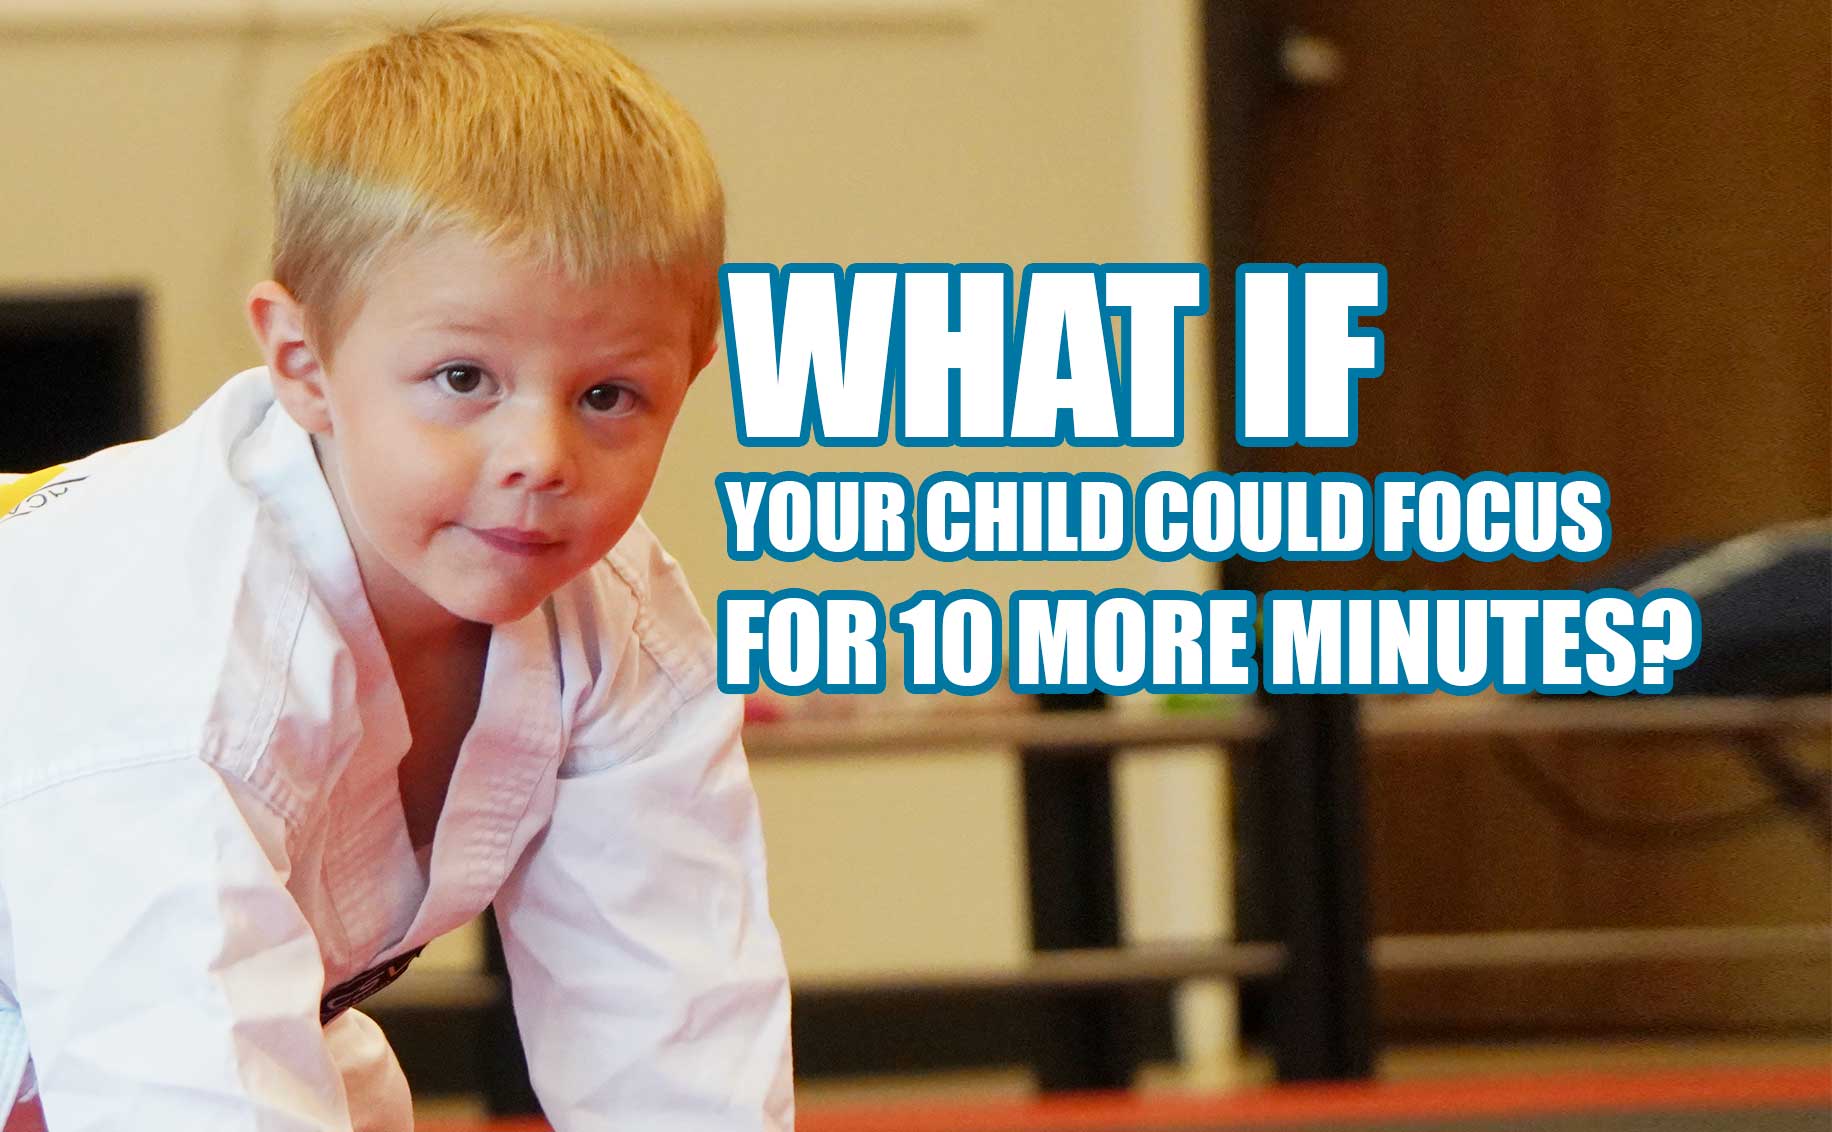 What if your child could focus for 10 more minutes?